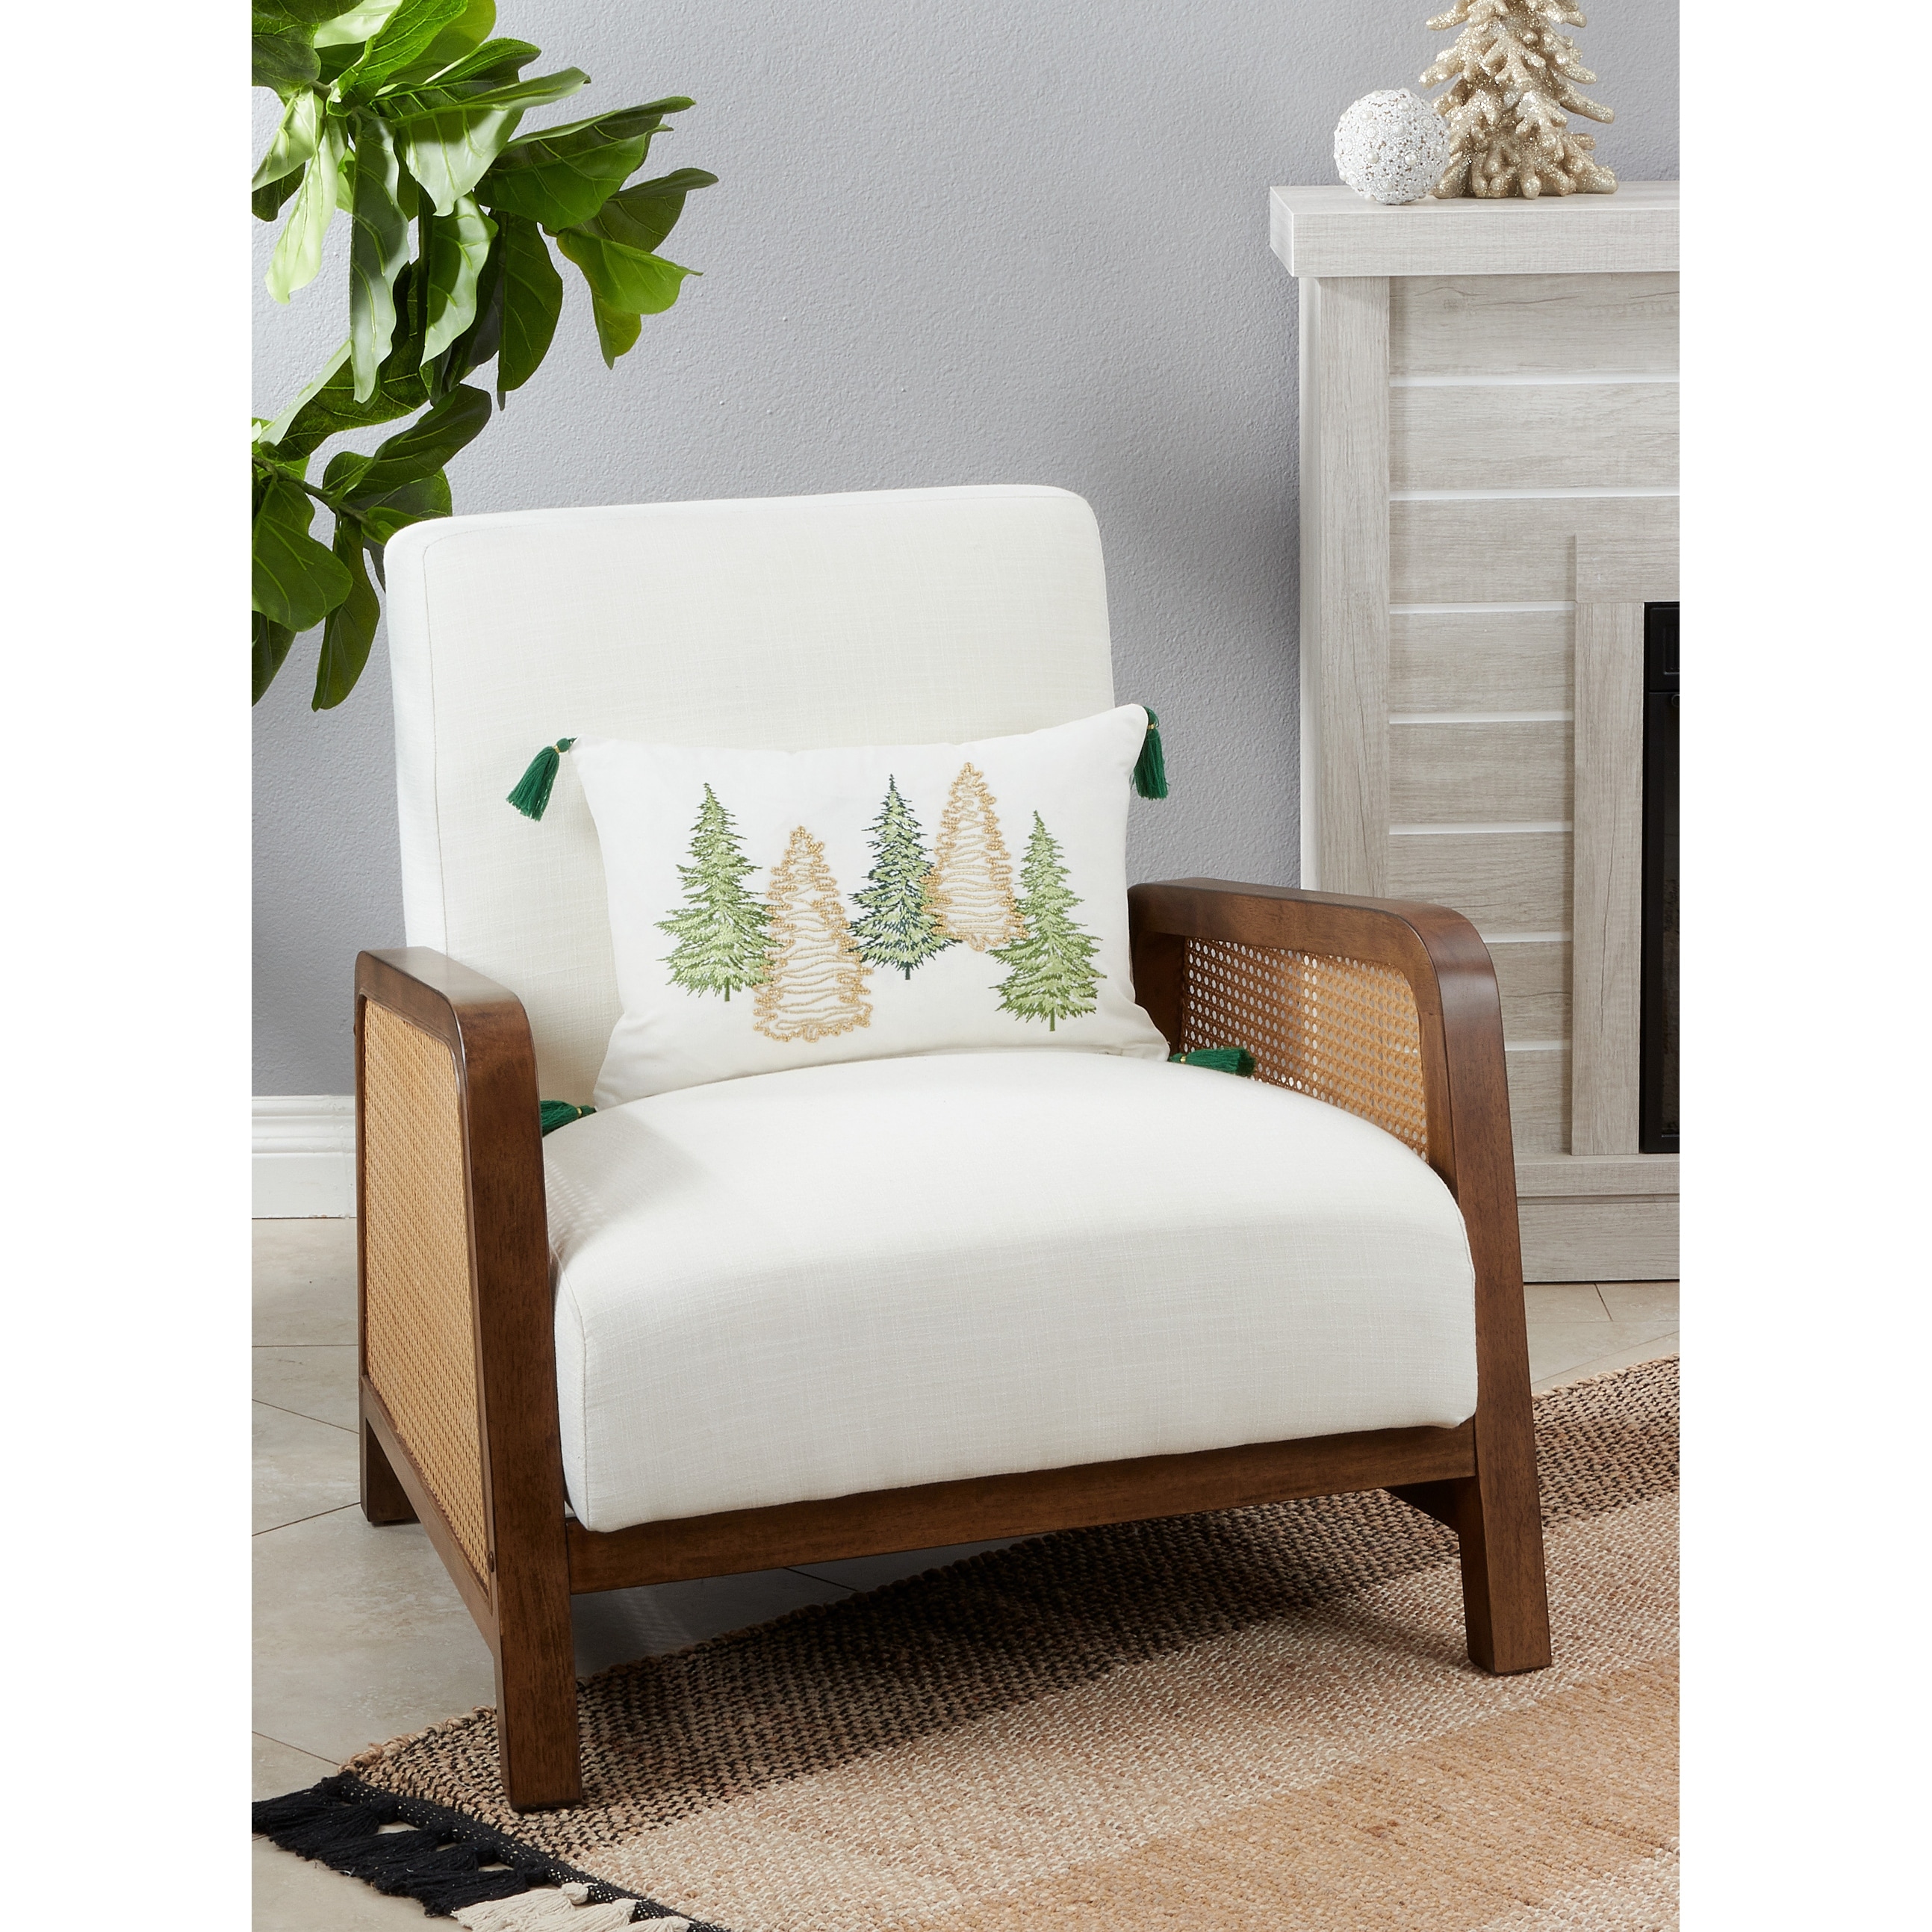 https://ak1.ostkcdn.com/images/products/is/images/direct/0c94d99882b5384773d49a2ea5bed8f9024b96c7/Throw-Pillow-With-Christmas-Trees-Design.jpg